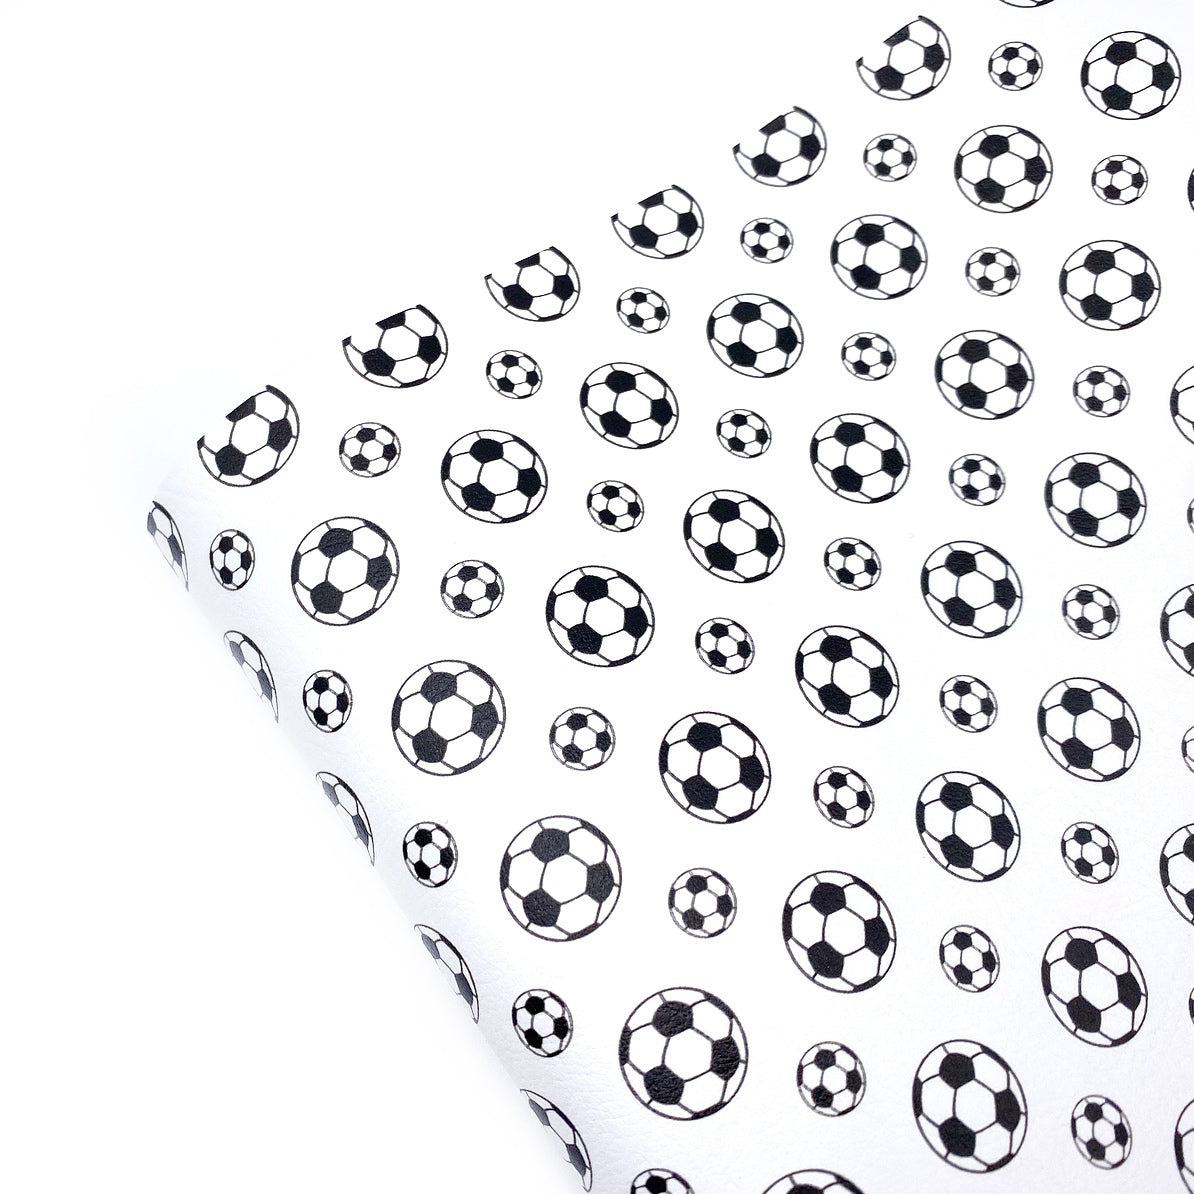 Footballer Premium Faux Leather Fabric Sheets